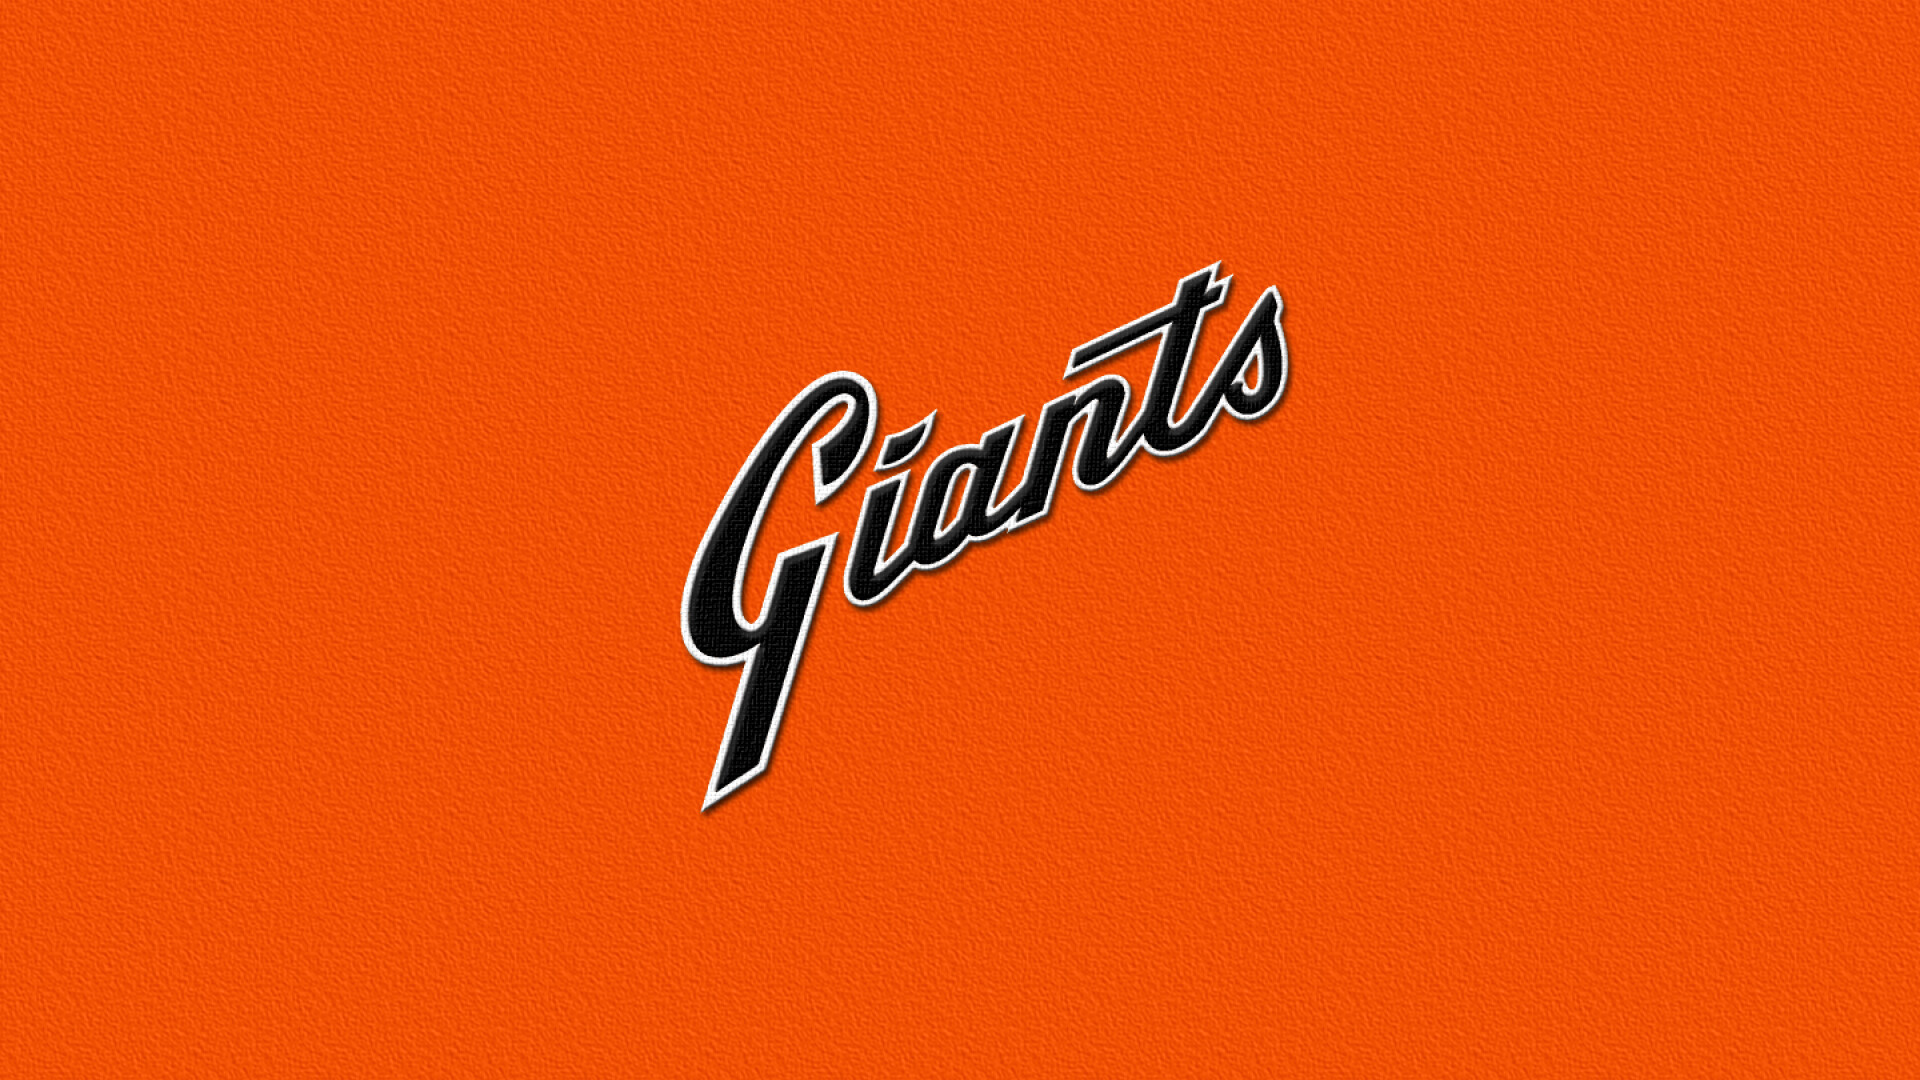 San Francisco Giants: Five-time World Series championships winners, The Baseball Hall of Fame members. 1920x1080 Full HD Background.